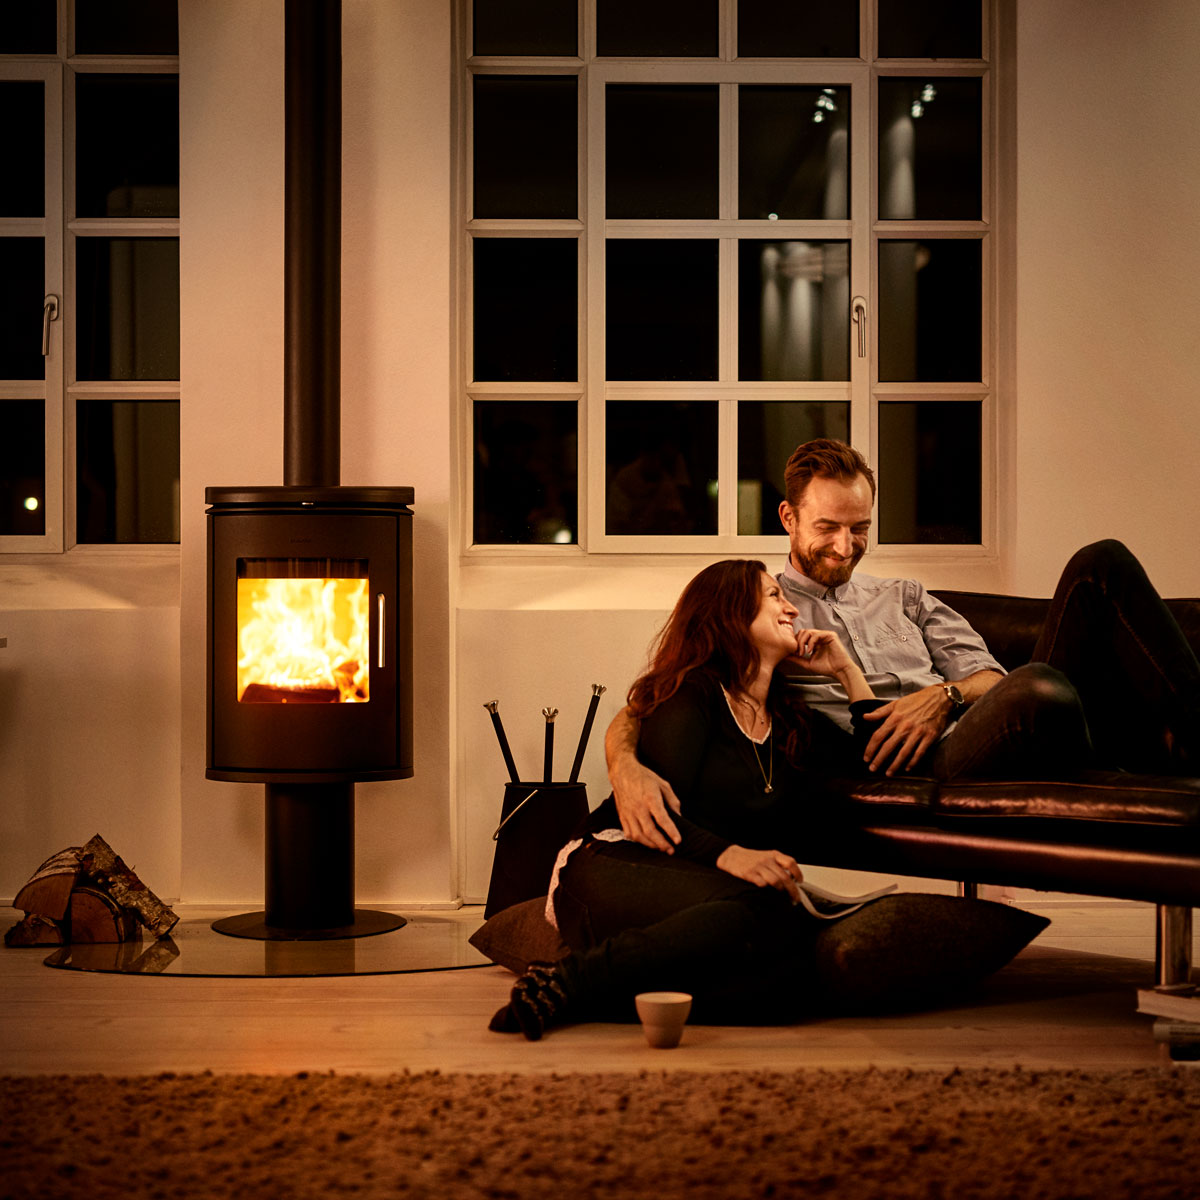 Morso 6148 wood heater in living room next to smiling couple